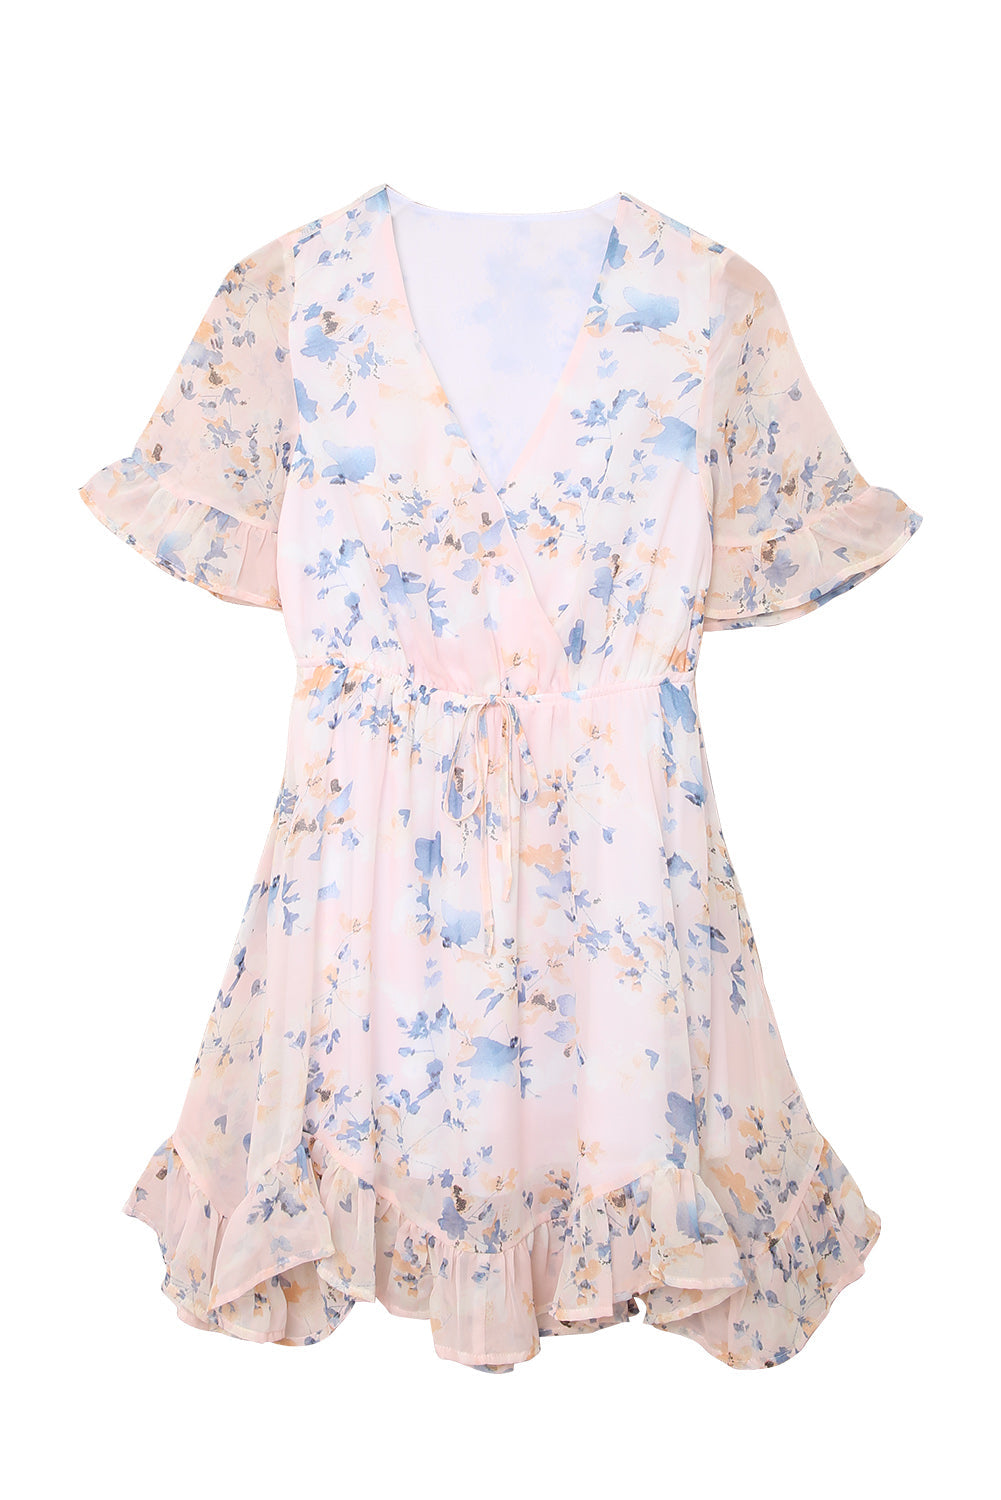 Floral Print Flared Sleeve Ruffle V Neck Dress for Ladies